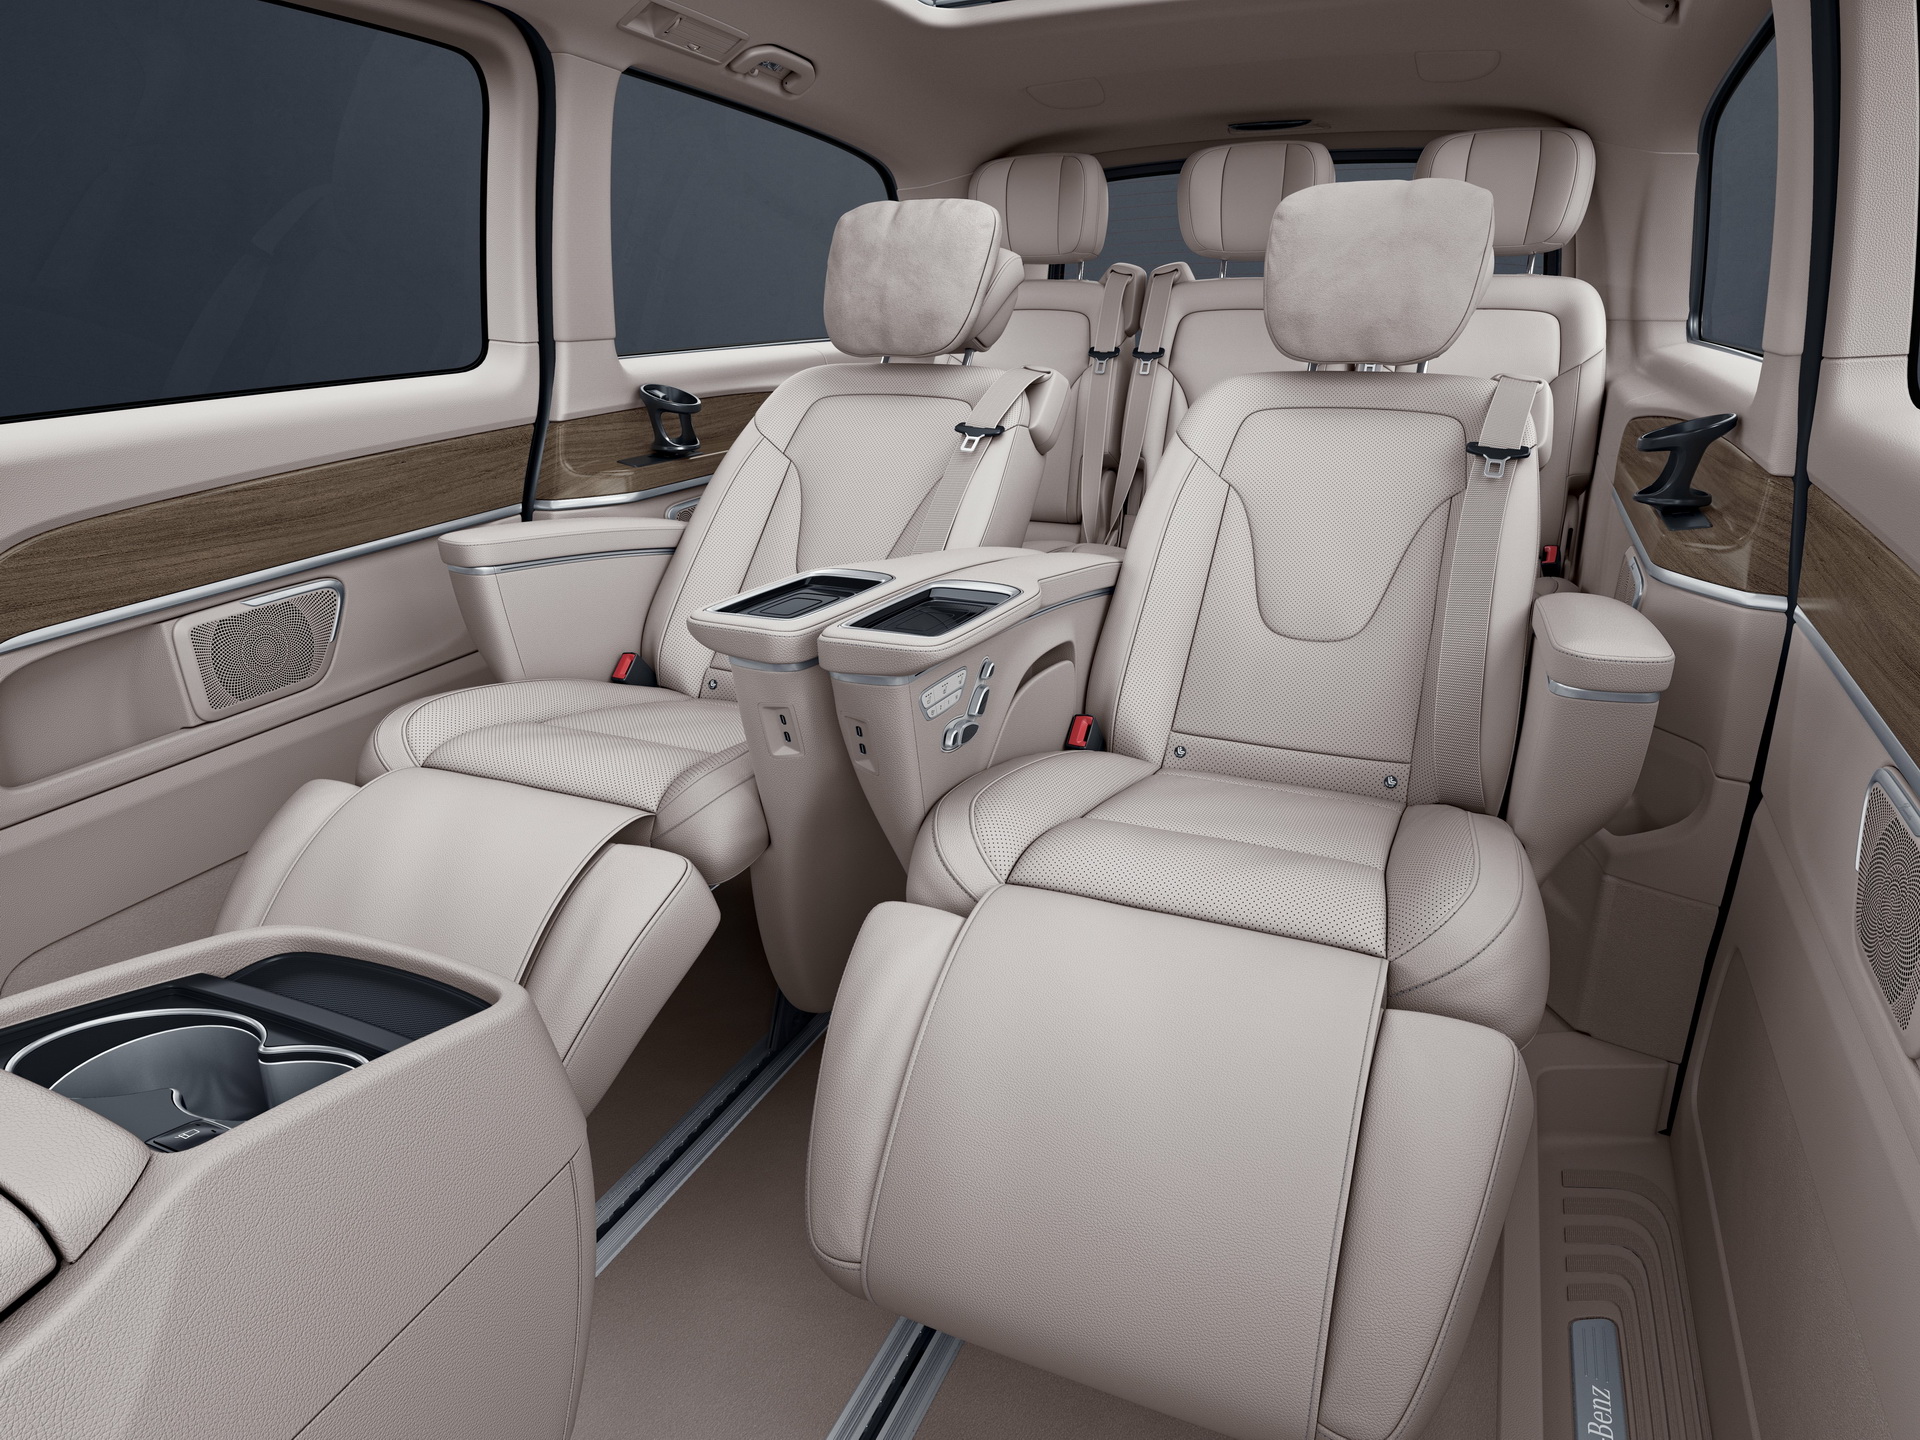 China, This Is Your 2021 MercedesBenz VClass Luxury Minivan Carscoops